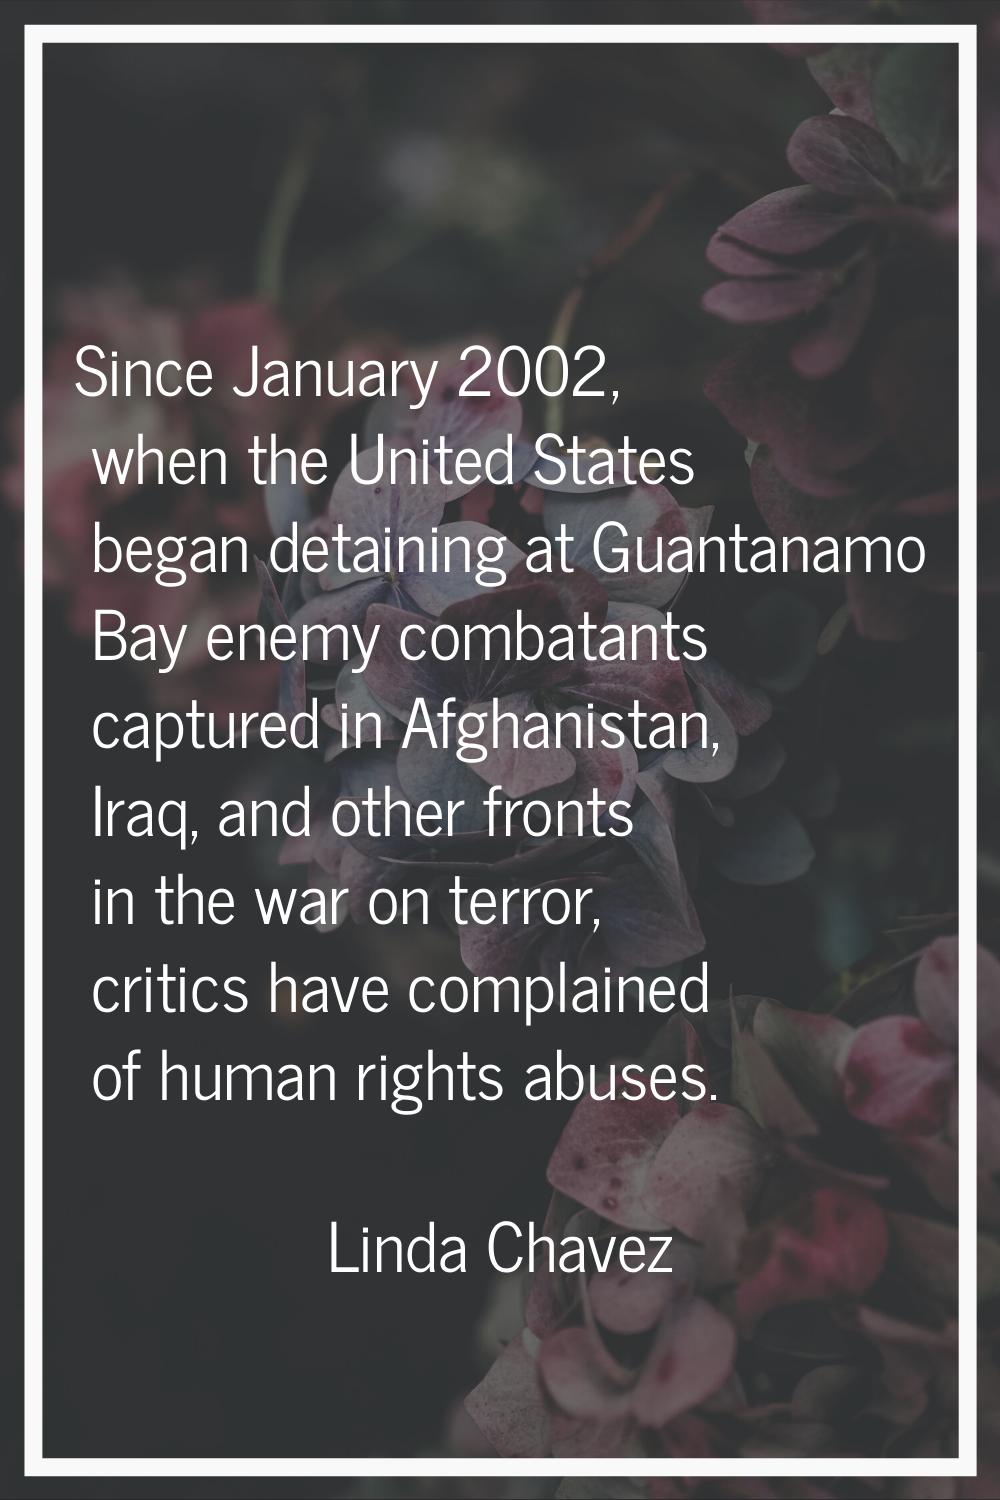 Since January 2002, when the United States began detaining at Guantanamo Bay enemy combatants captu